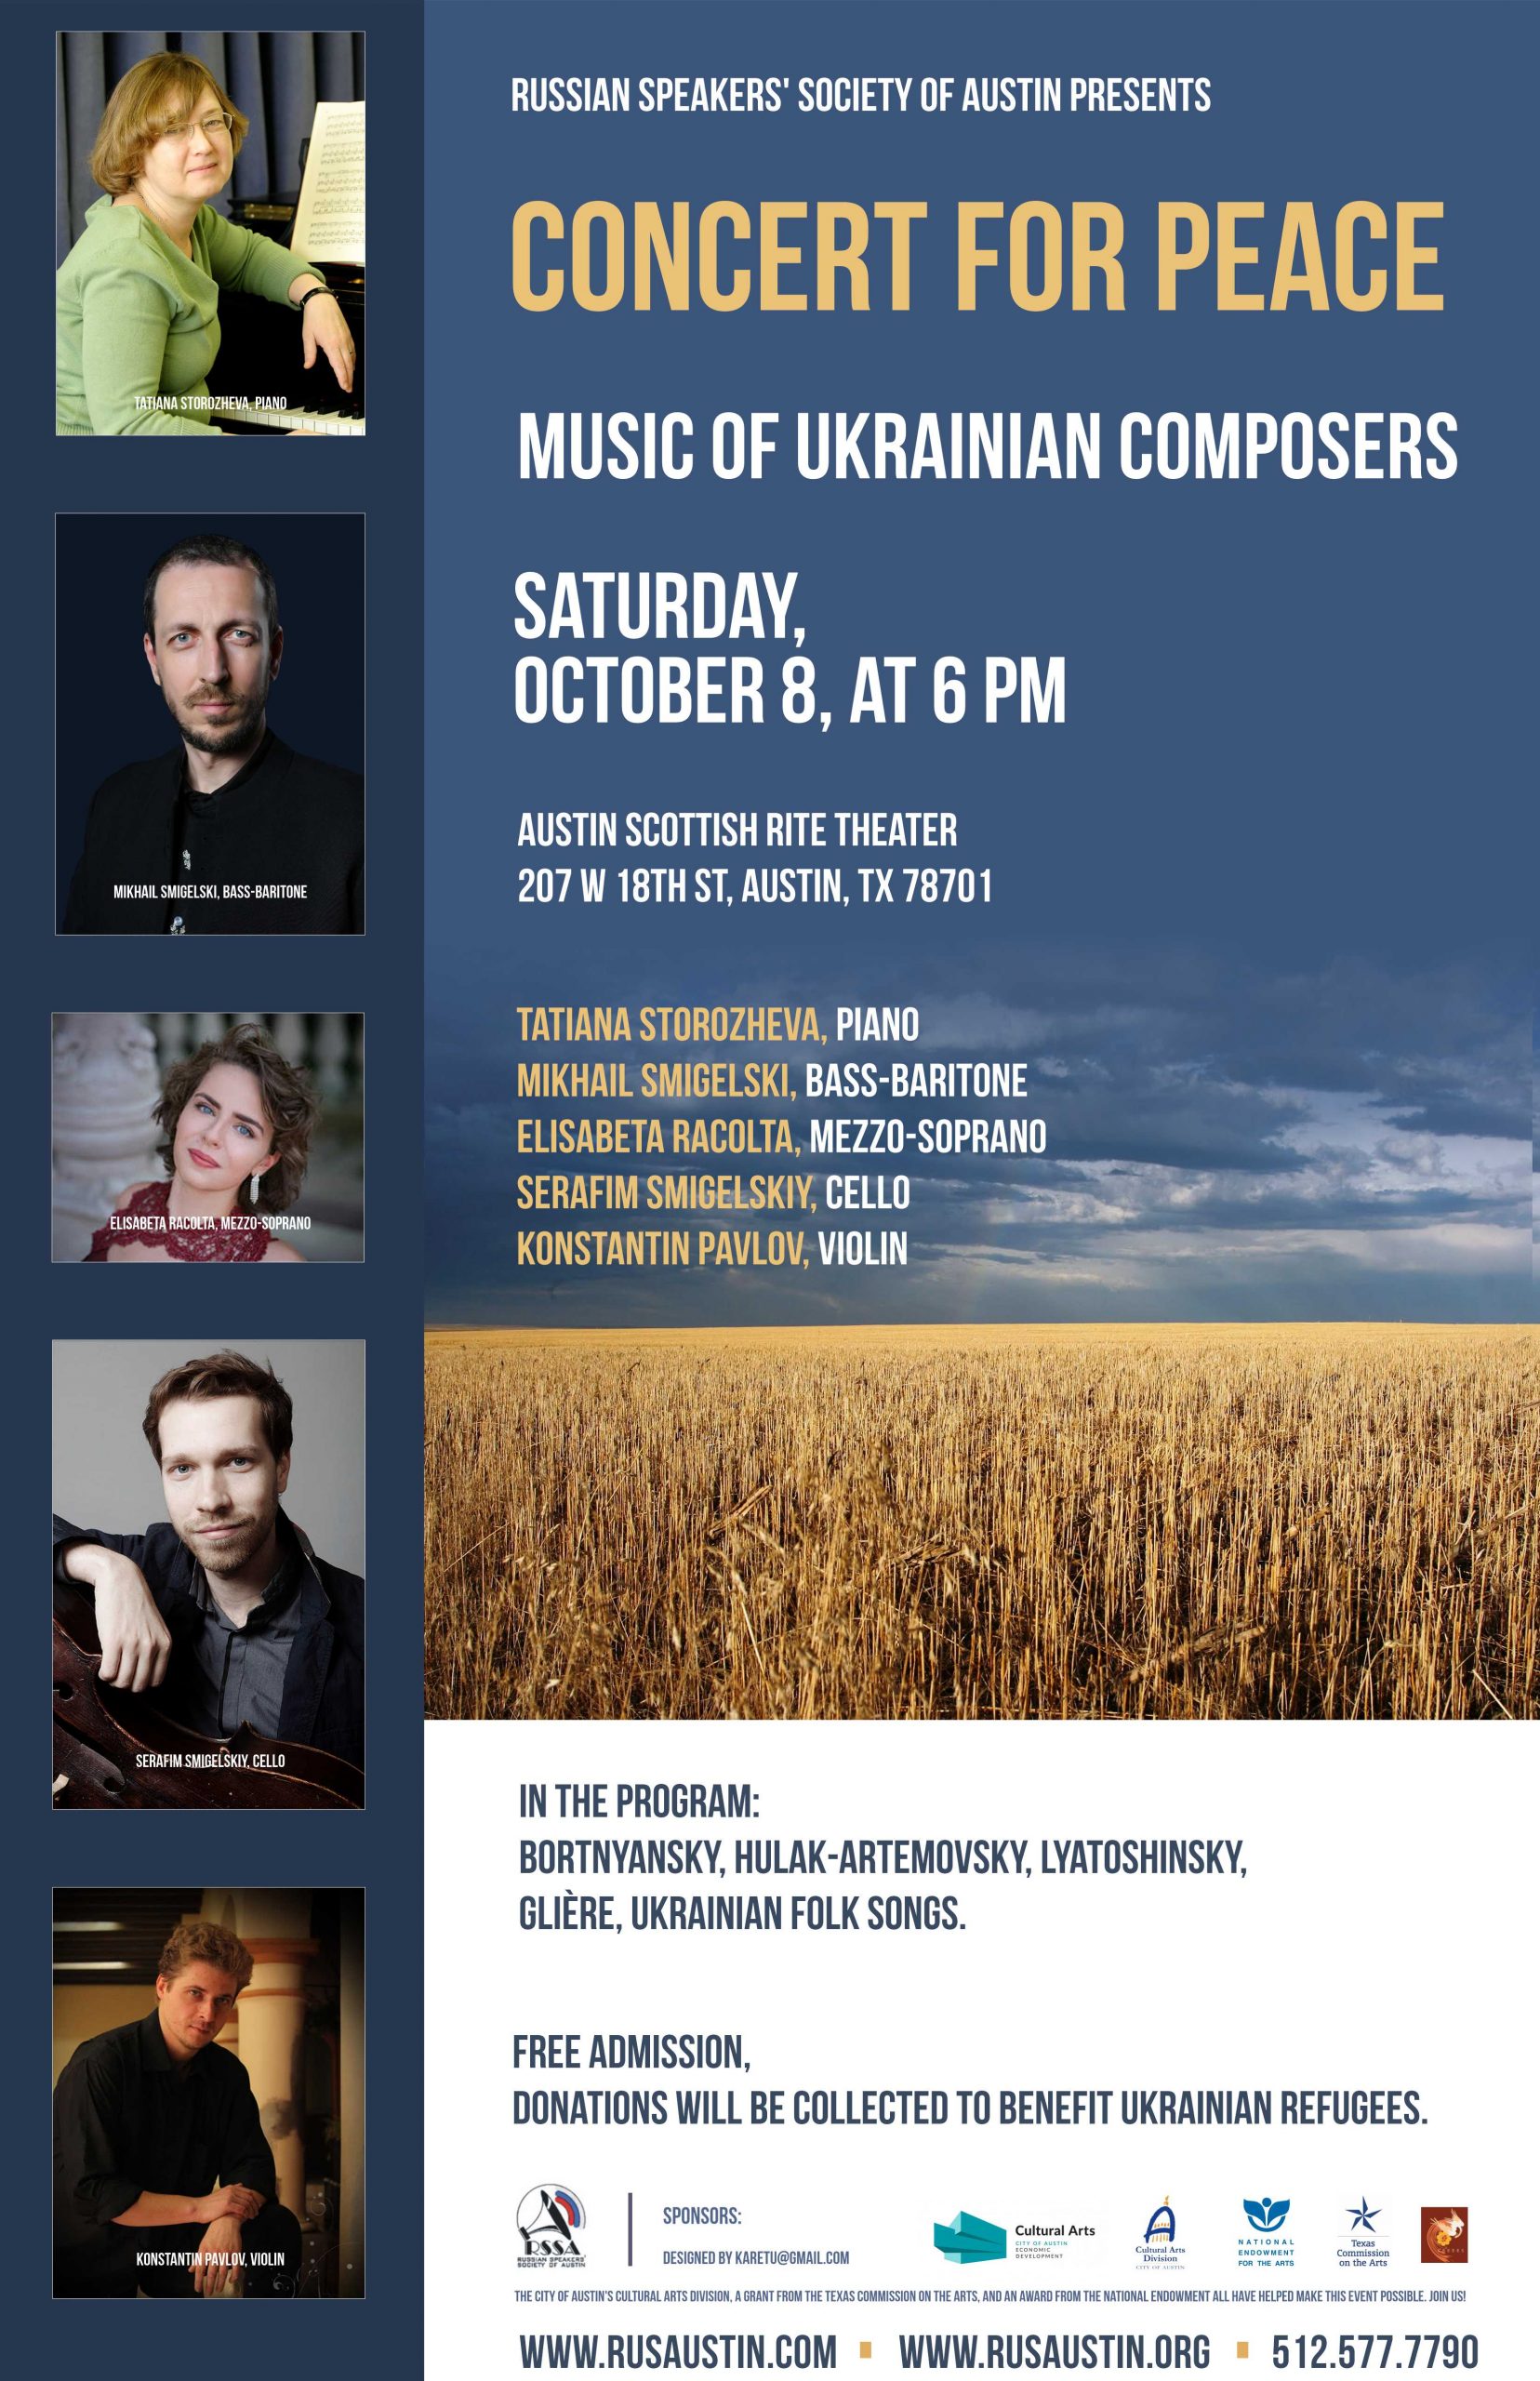 CONCERT FOR PEACE. Music of Ukrainian composers.